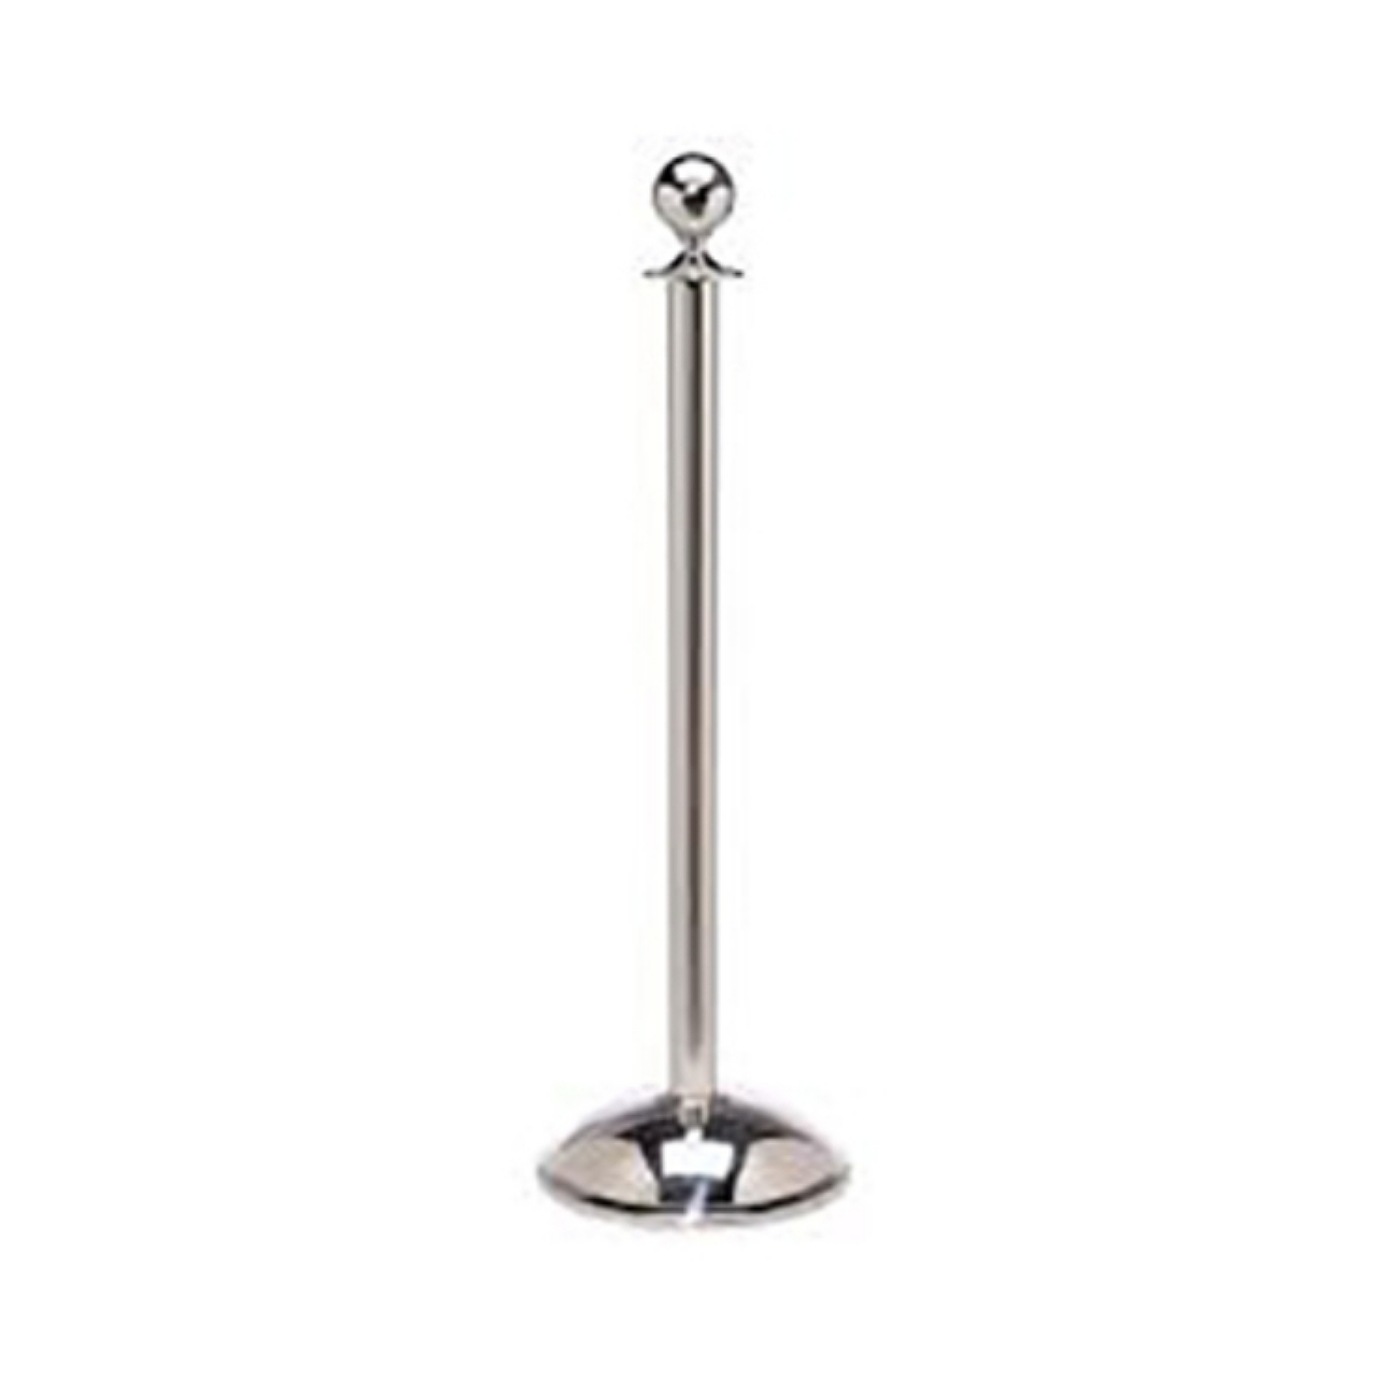 Silver Stanchion Pole With Silver Ball Top.